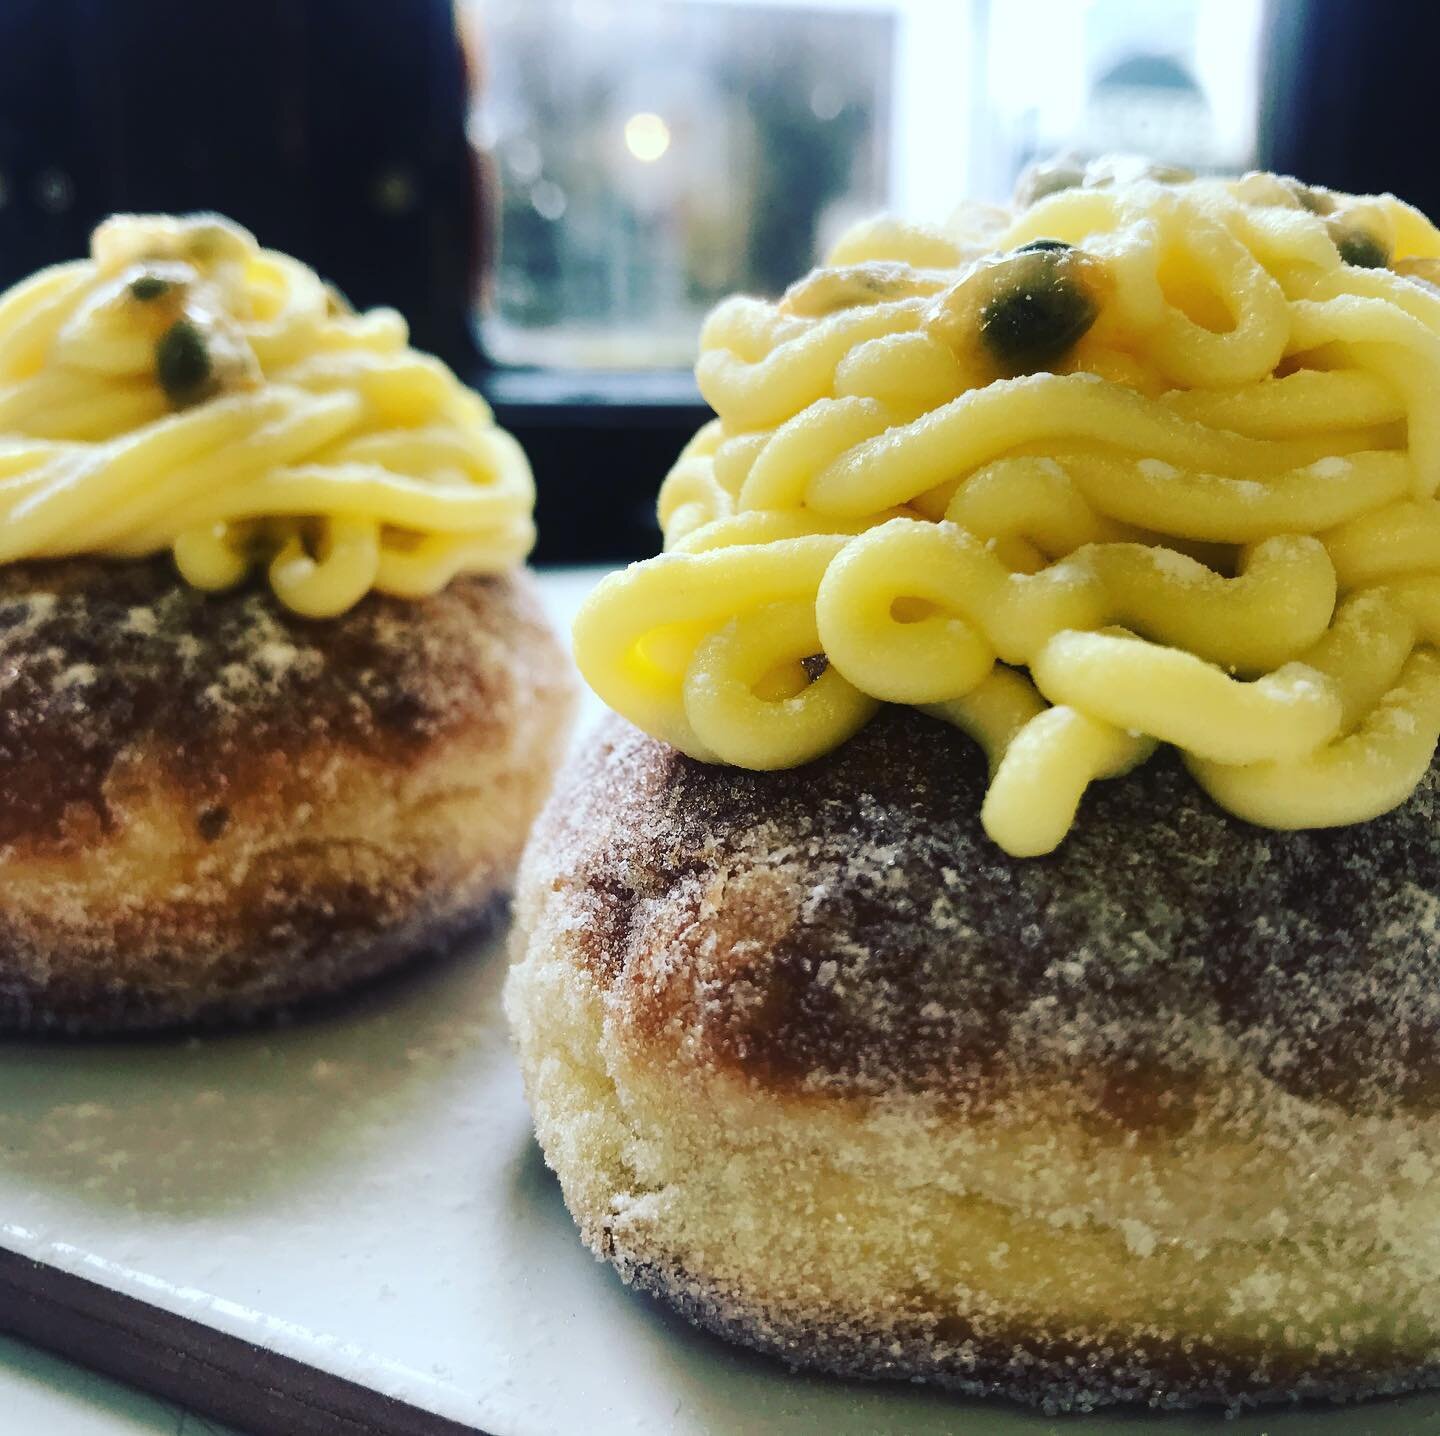 A star is born.
🍩
The white chocolate and passion fruit donut.
Fried daily for maximum freshness.
Available over the counter and soon on the website.
X
#mrsbs #leicester #donuts #whitechocolate #passionfruit